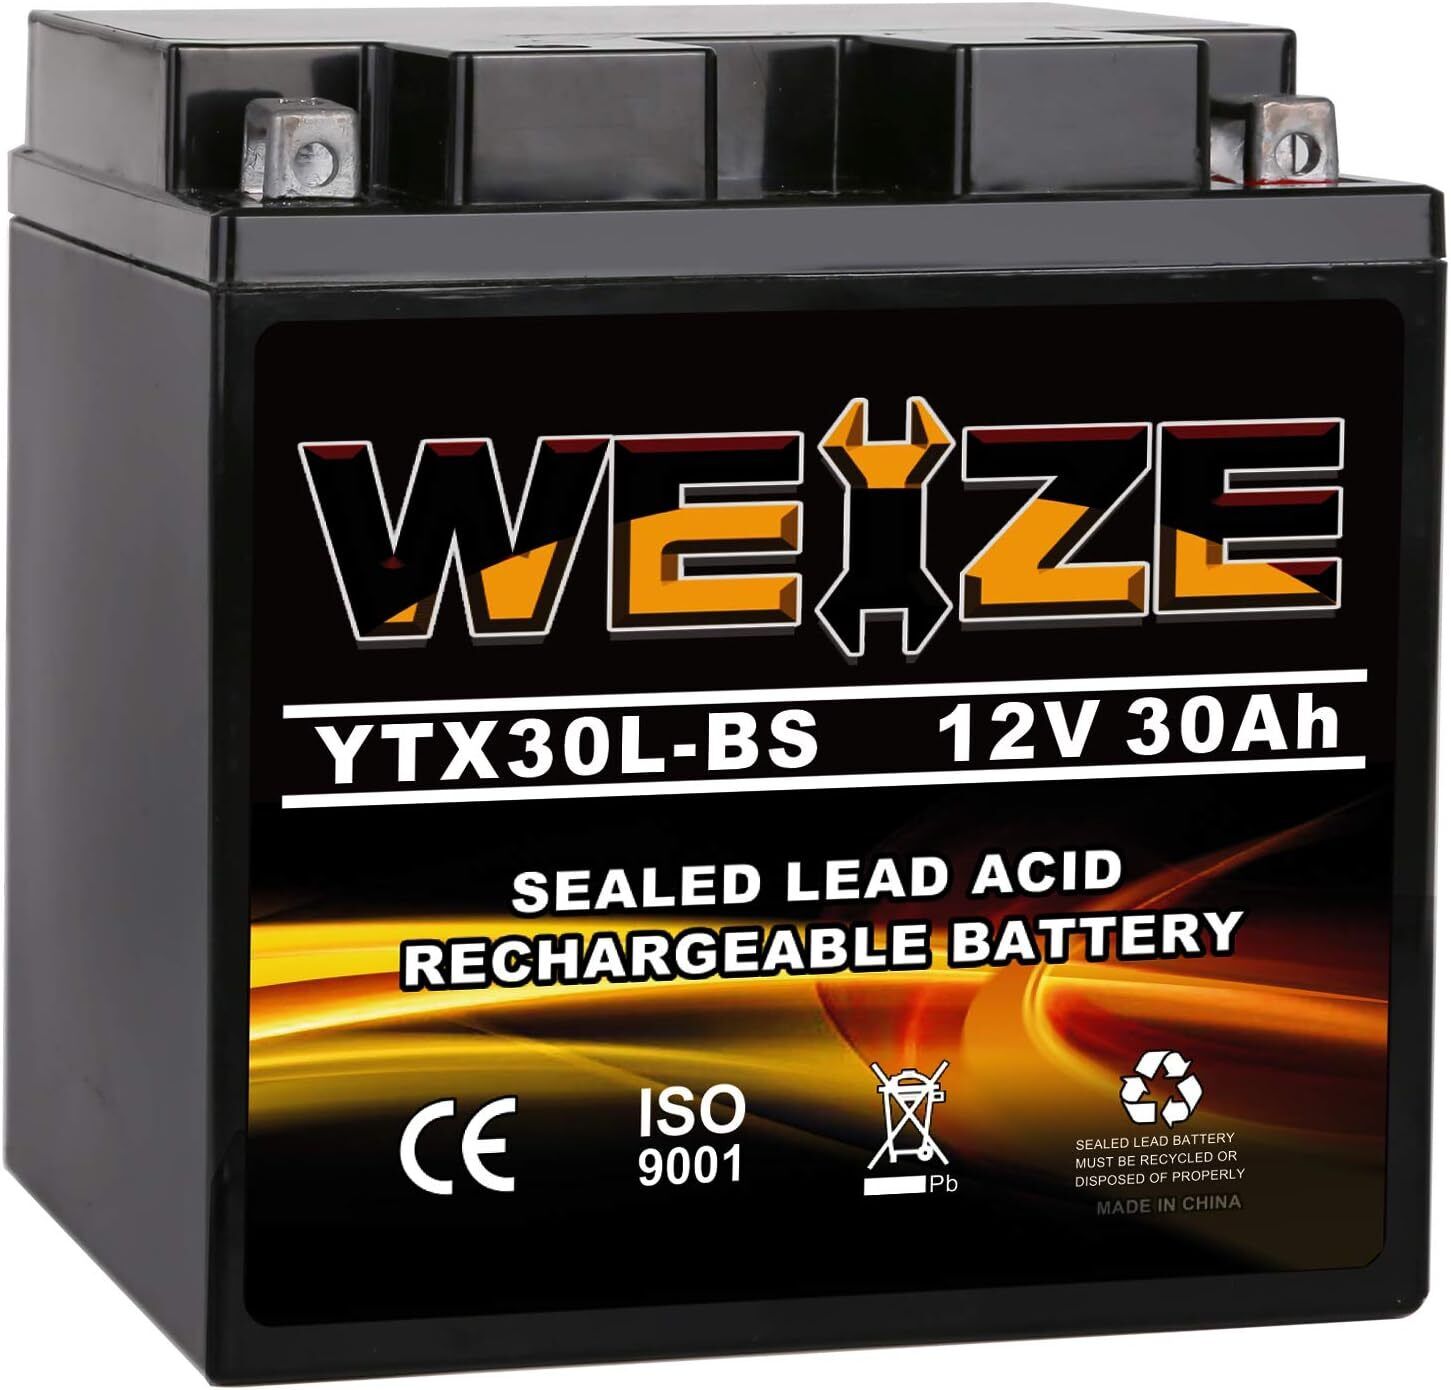 YTX30L-BS Battery Replacement Yuasa YIX30L Motorcycle Battery - Factory Sealed